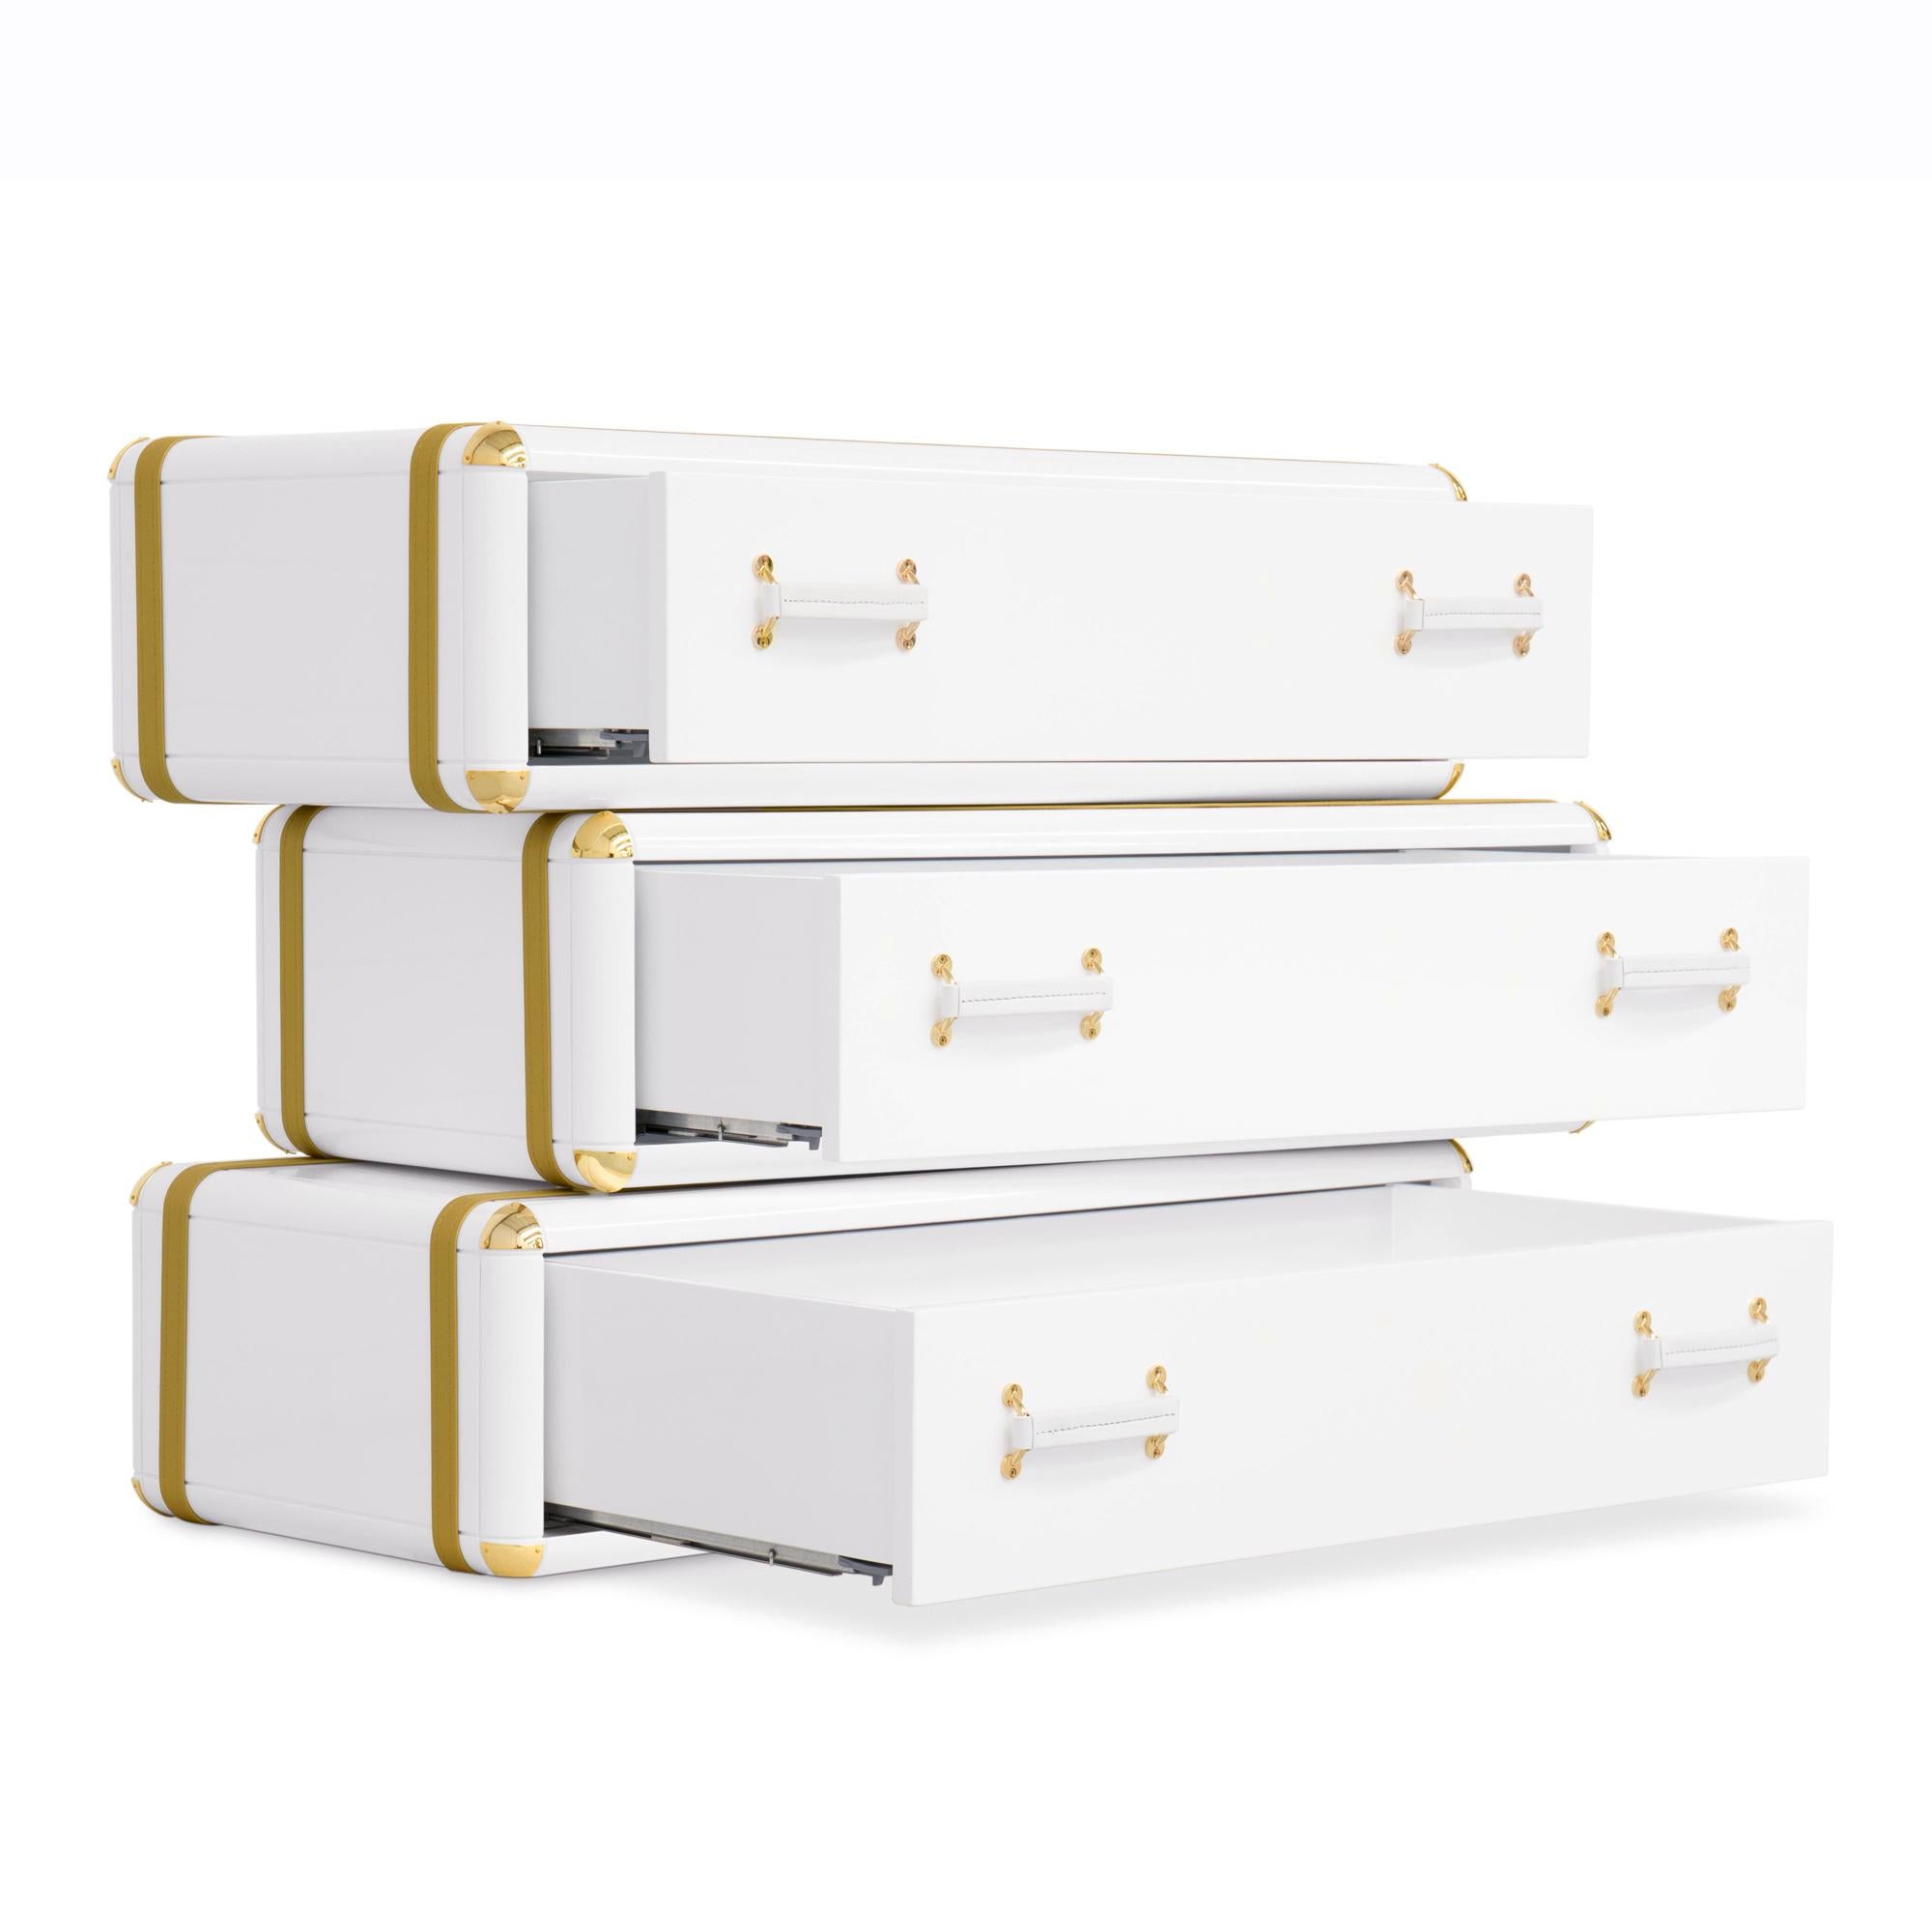 Portuguese White Flight Case Shelf of 3 Drawers in White Lacquered Finish For Sale